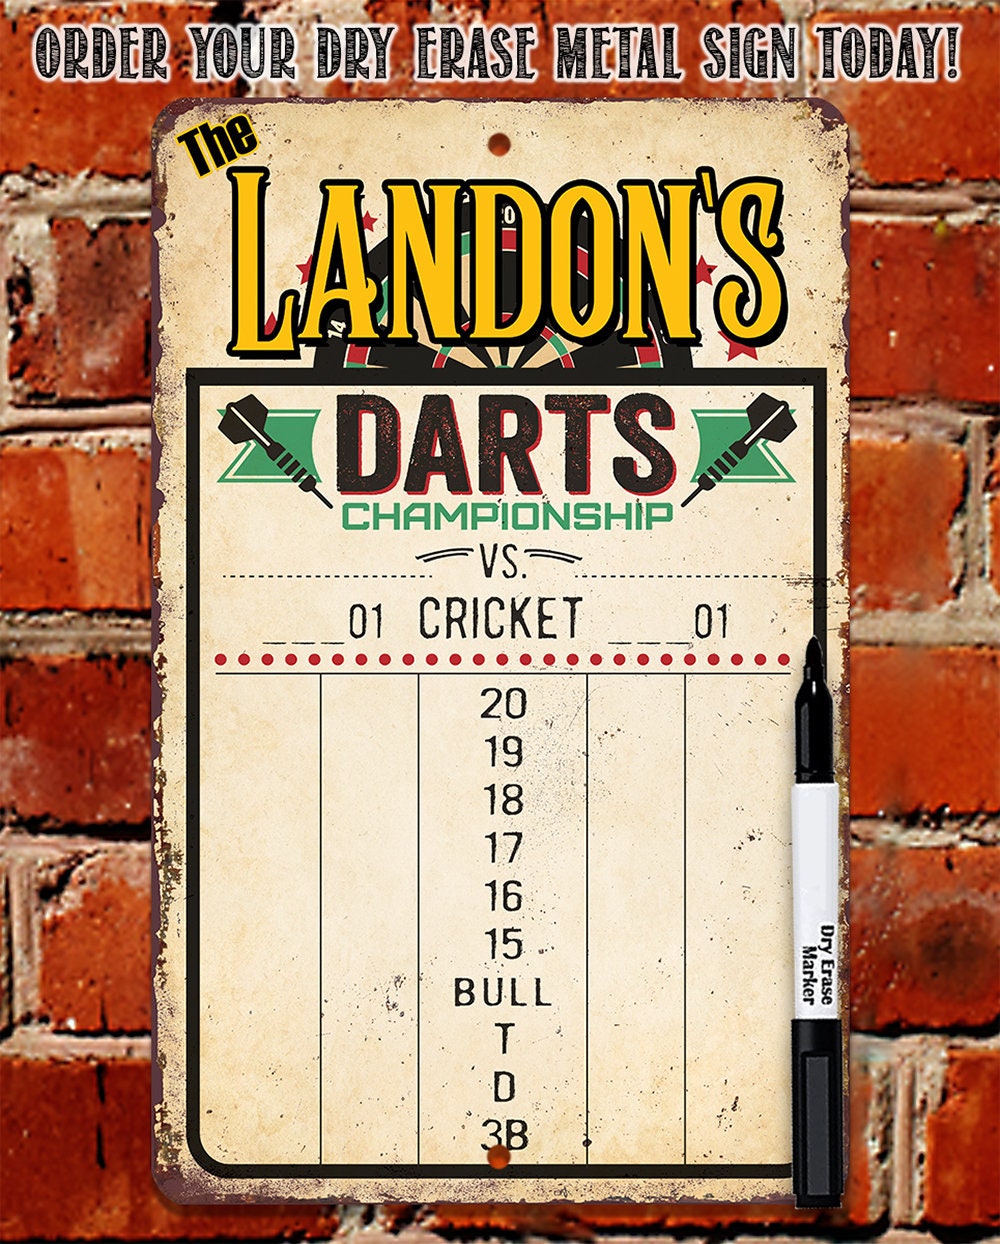 Dart Scoreboard Dry Erase for Keeping Score in All Cricket Games, 301 or 501 - Magnetic Dry Erase Marker with Eraser - Great Looking Darts Lone Star Art 